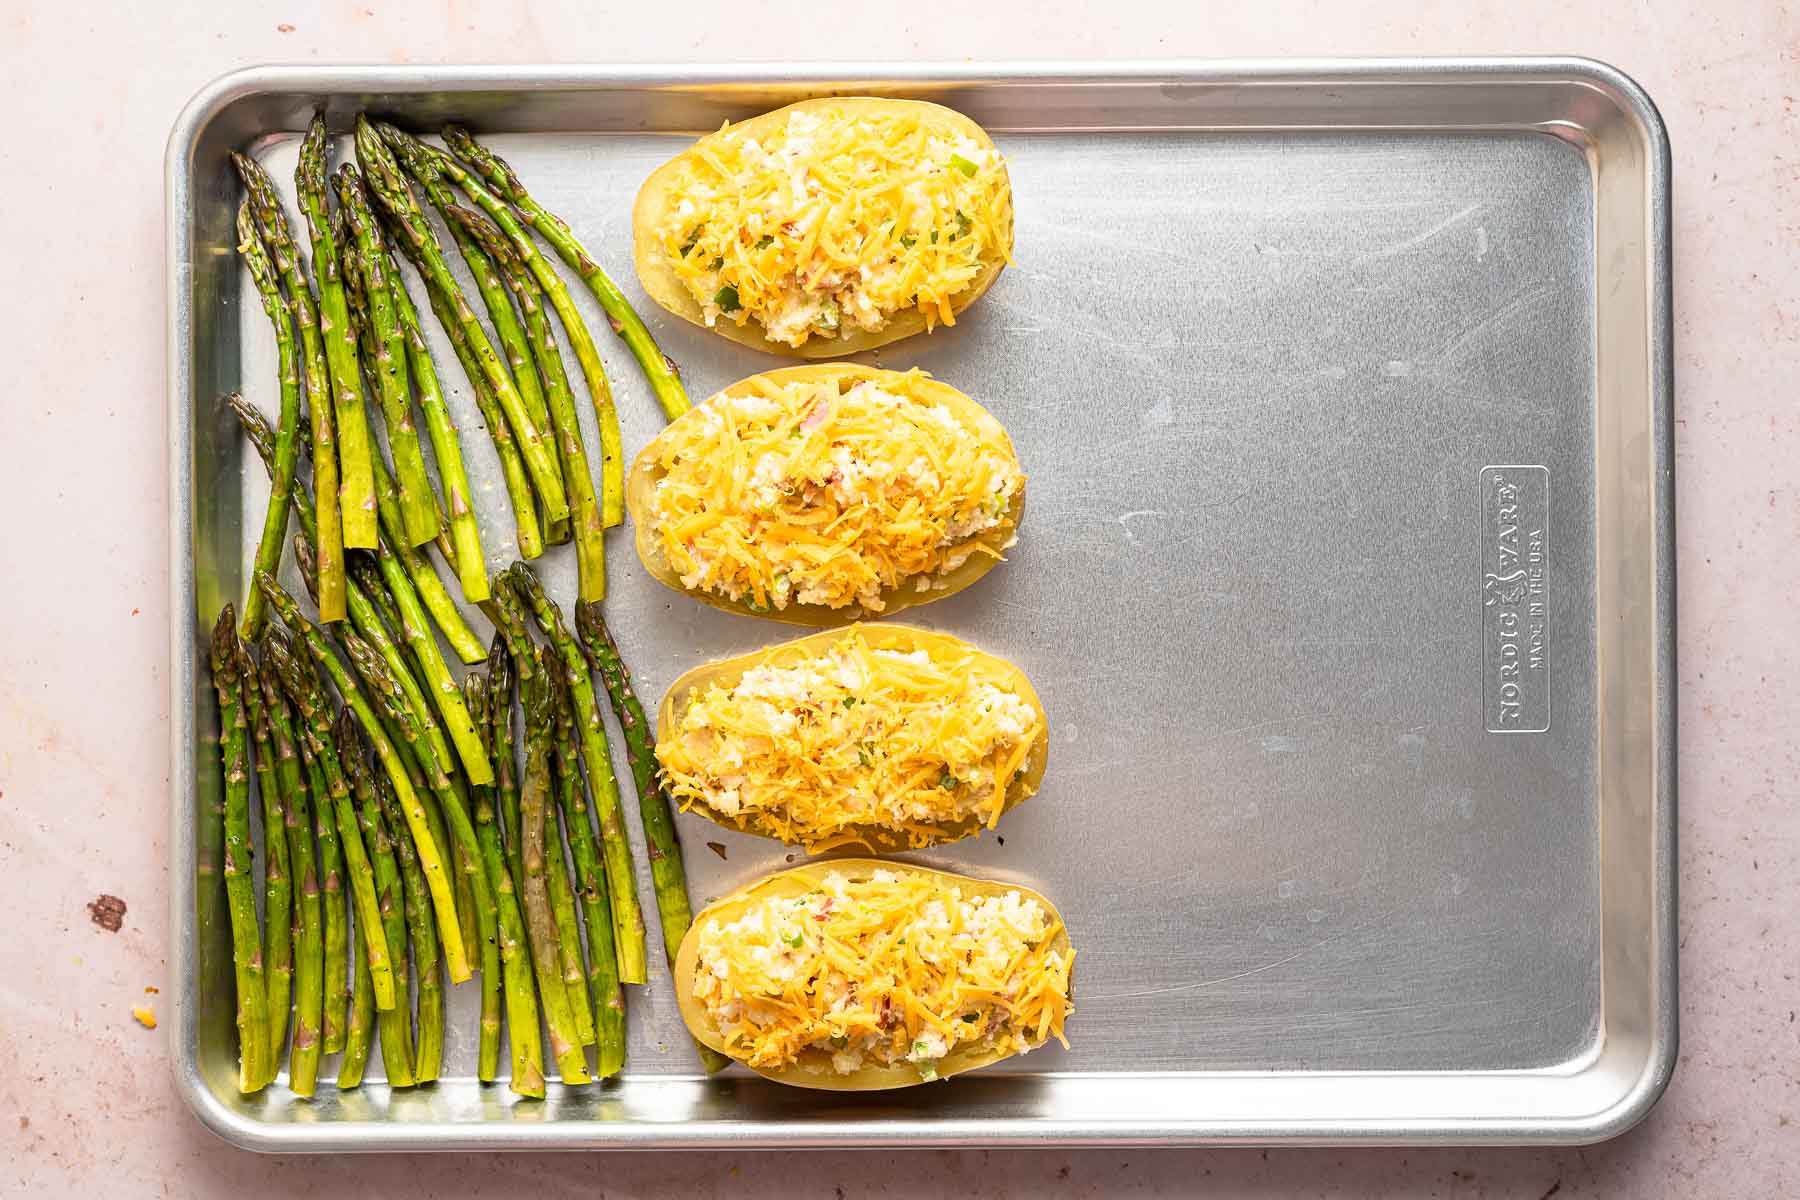 Asparagus and potatoes on a baking sheet.